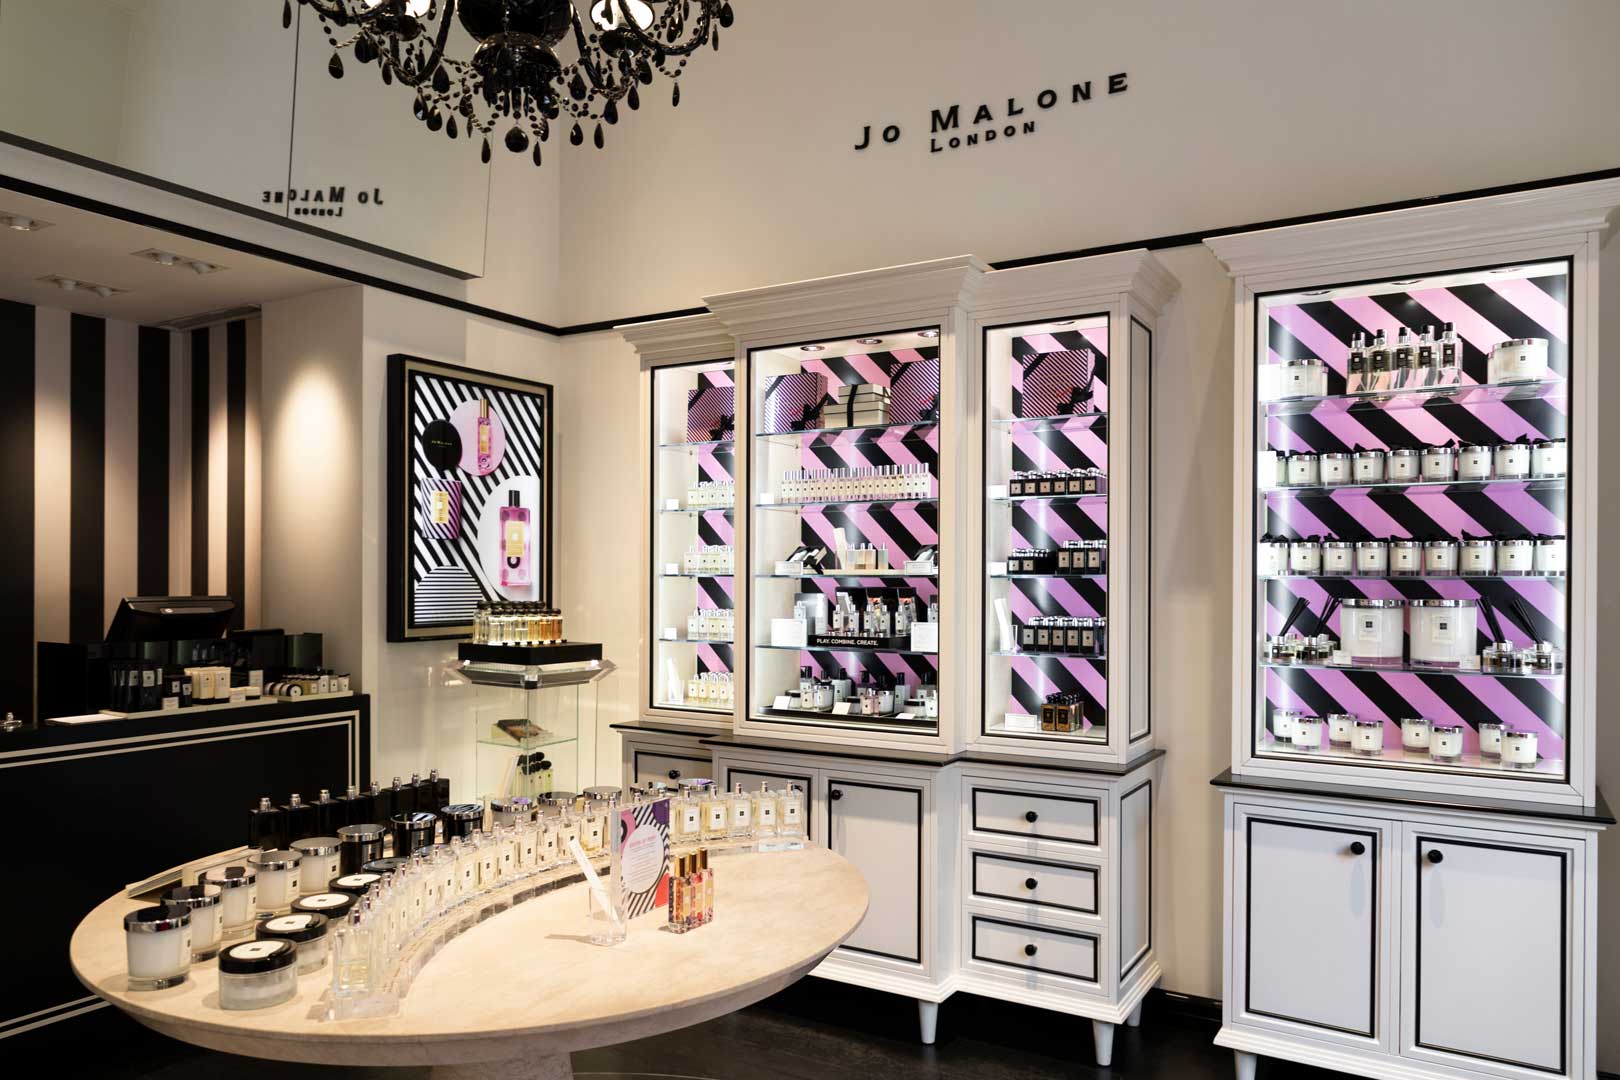 jo malone london | FLAWLESS.life - The Lifestyle Guide